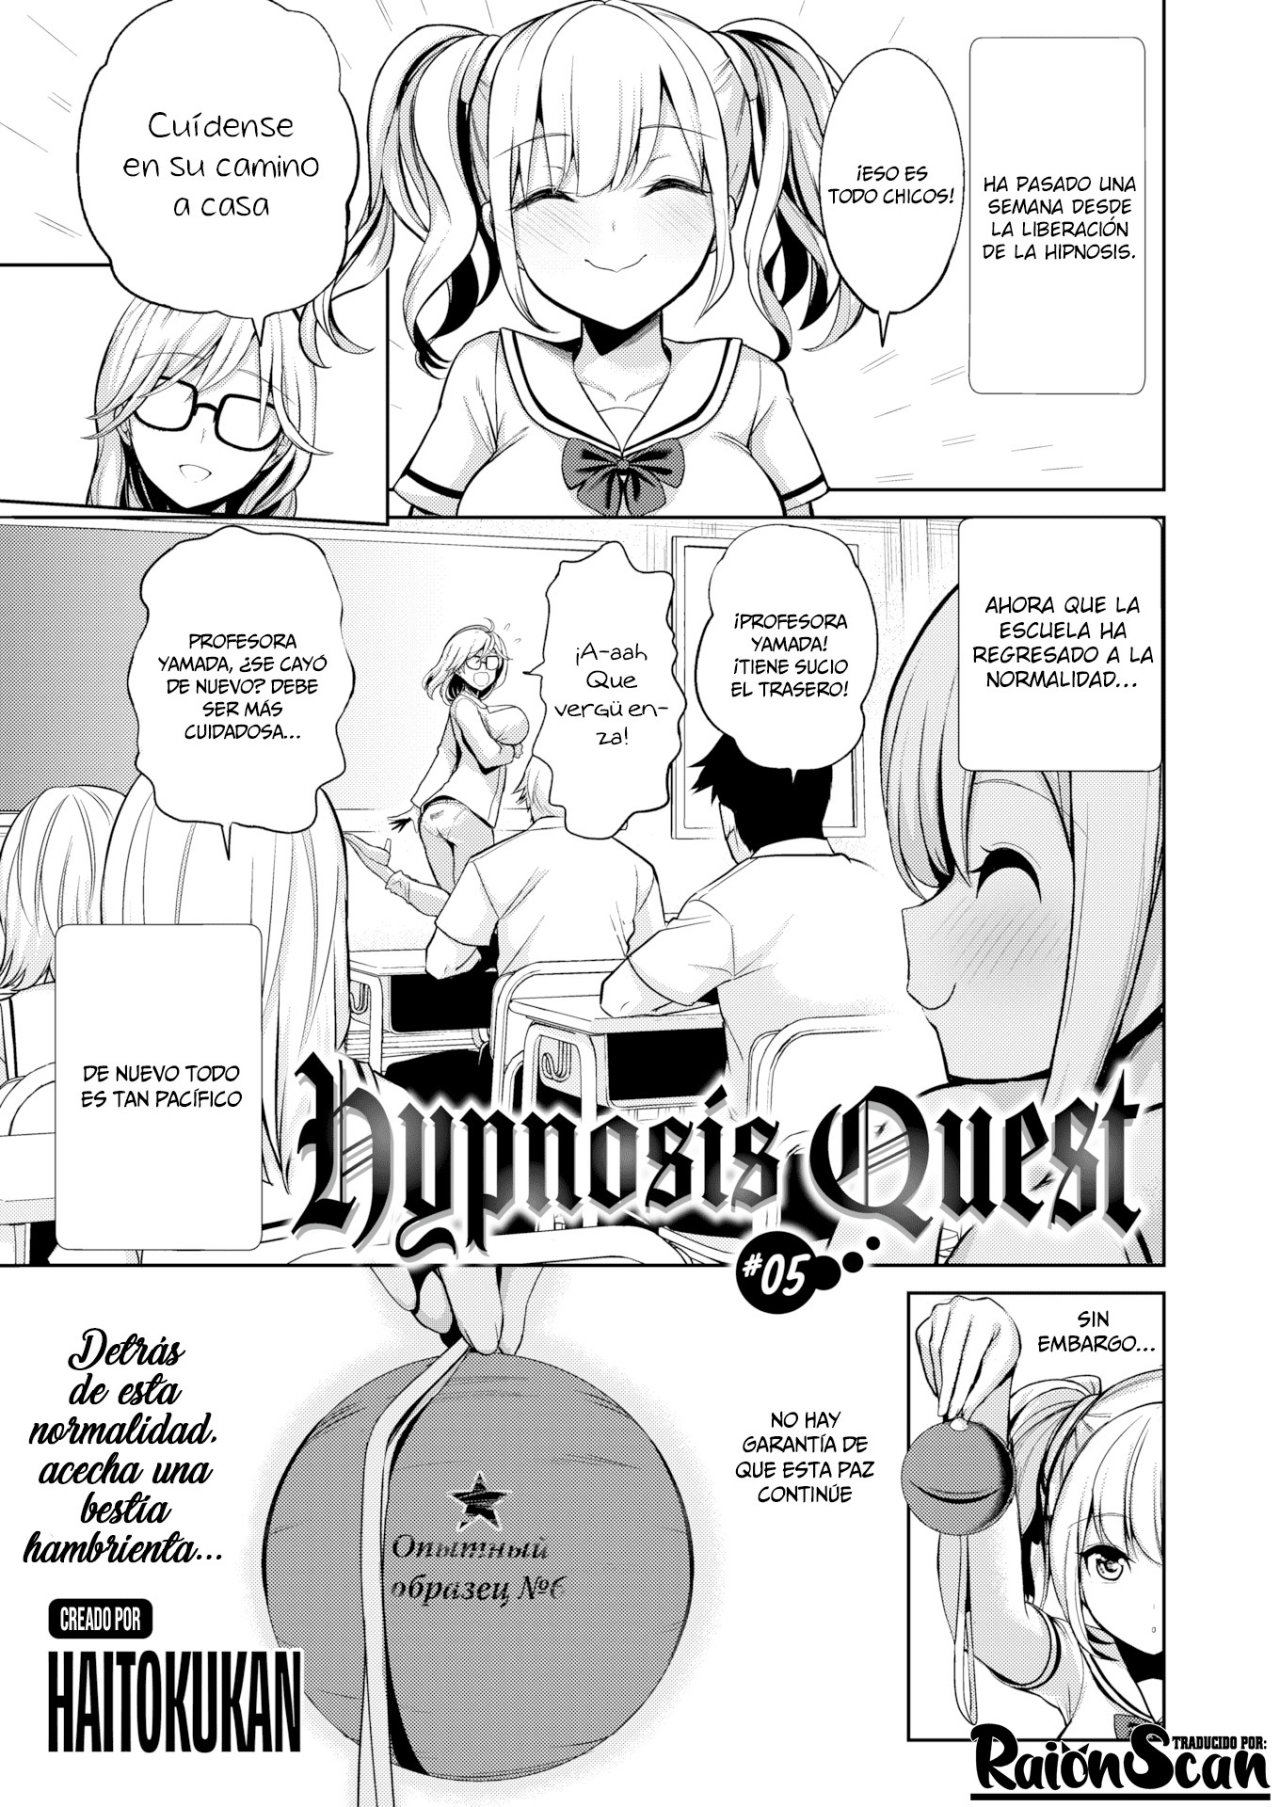 Hypnosis Quest 05 - 1